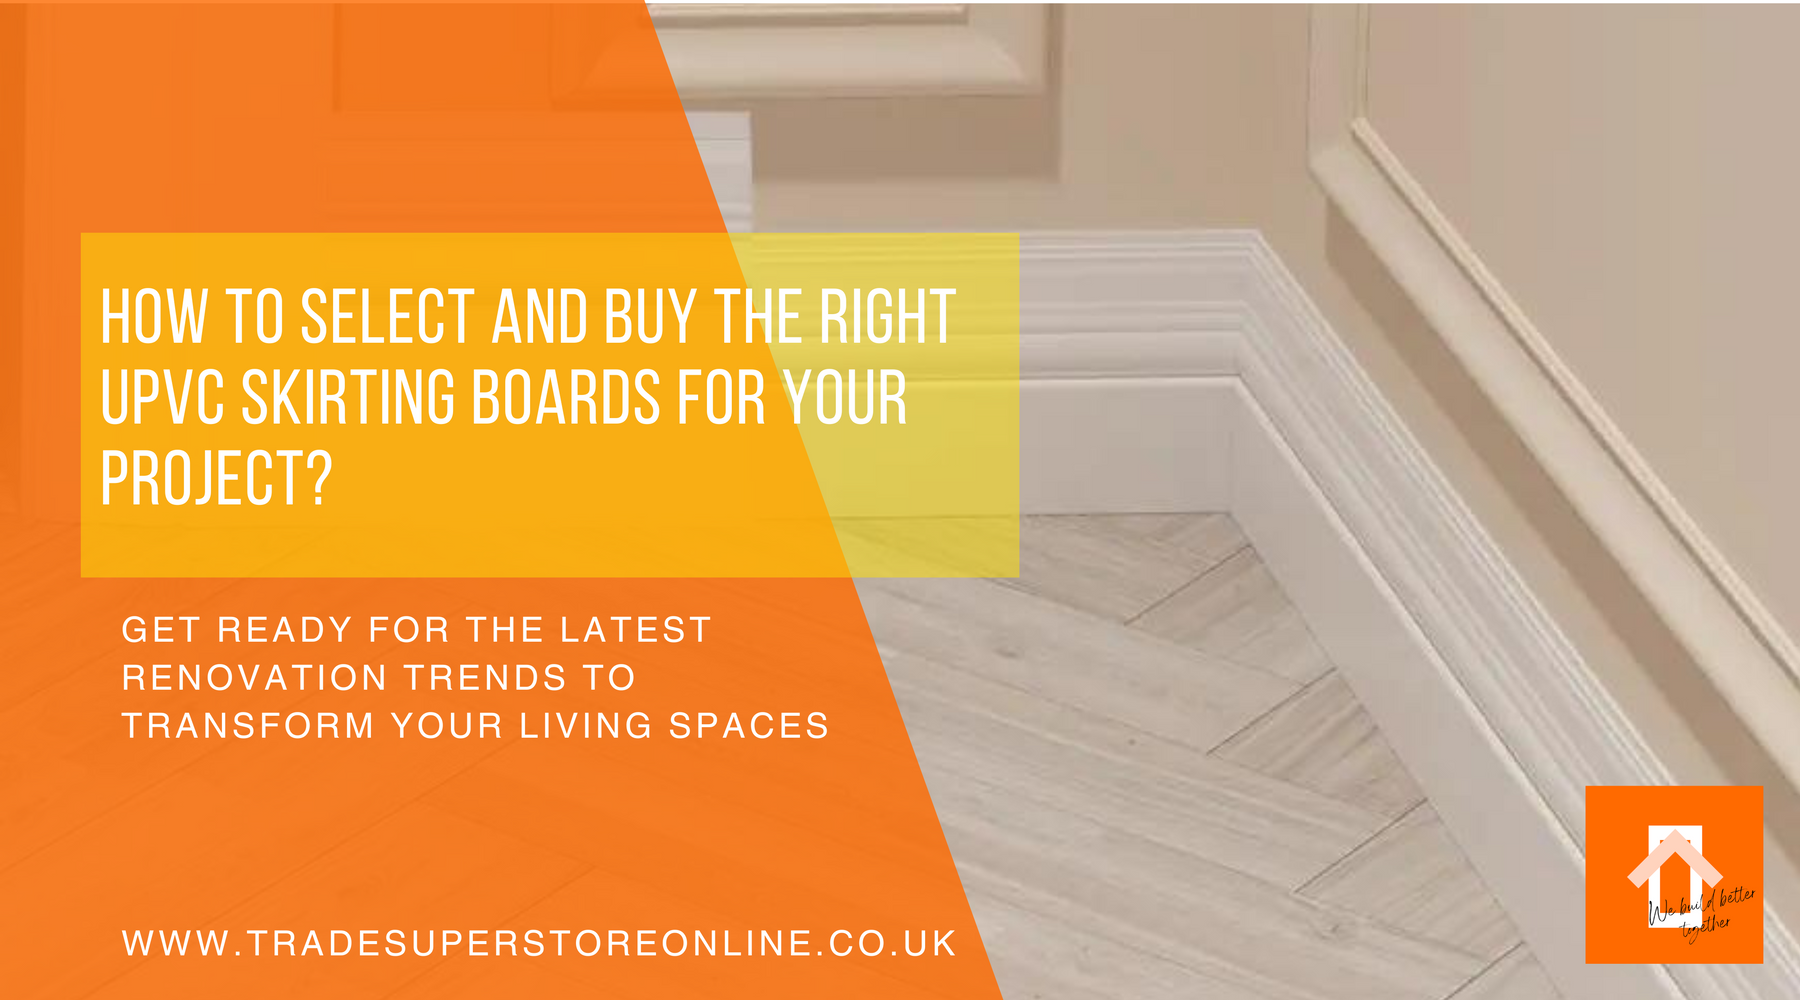 How to Select and Buy the Right UPVC Skirting Boards for Your Project?